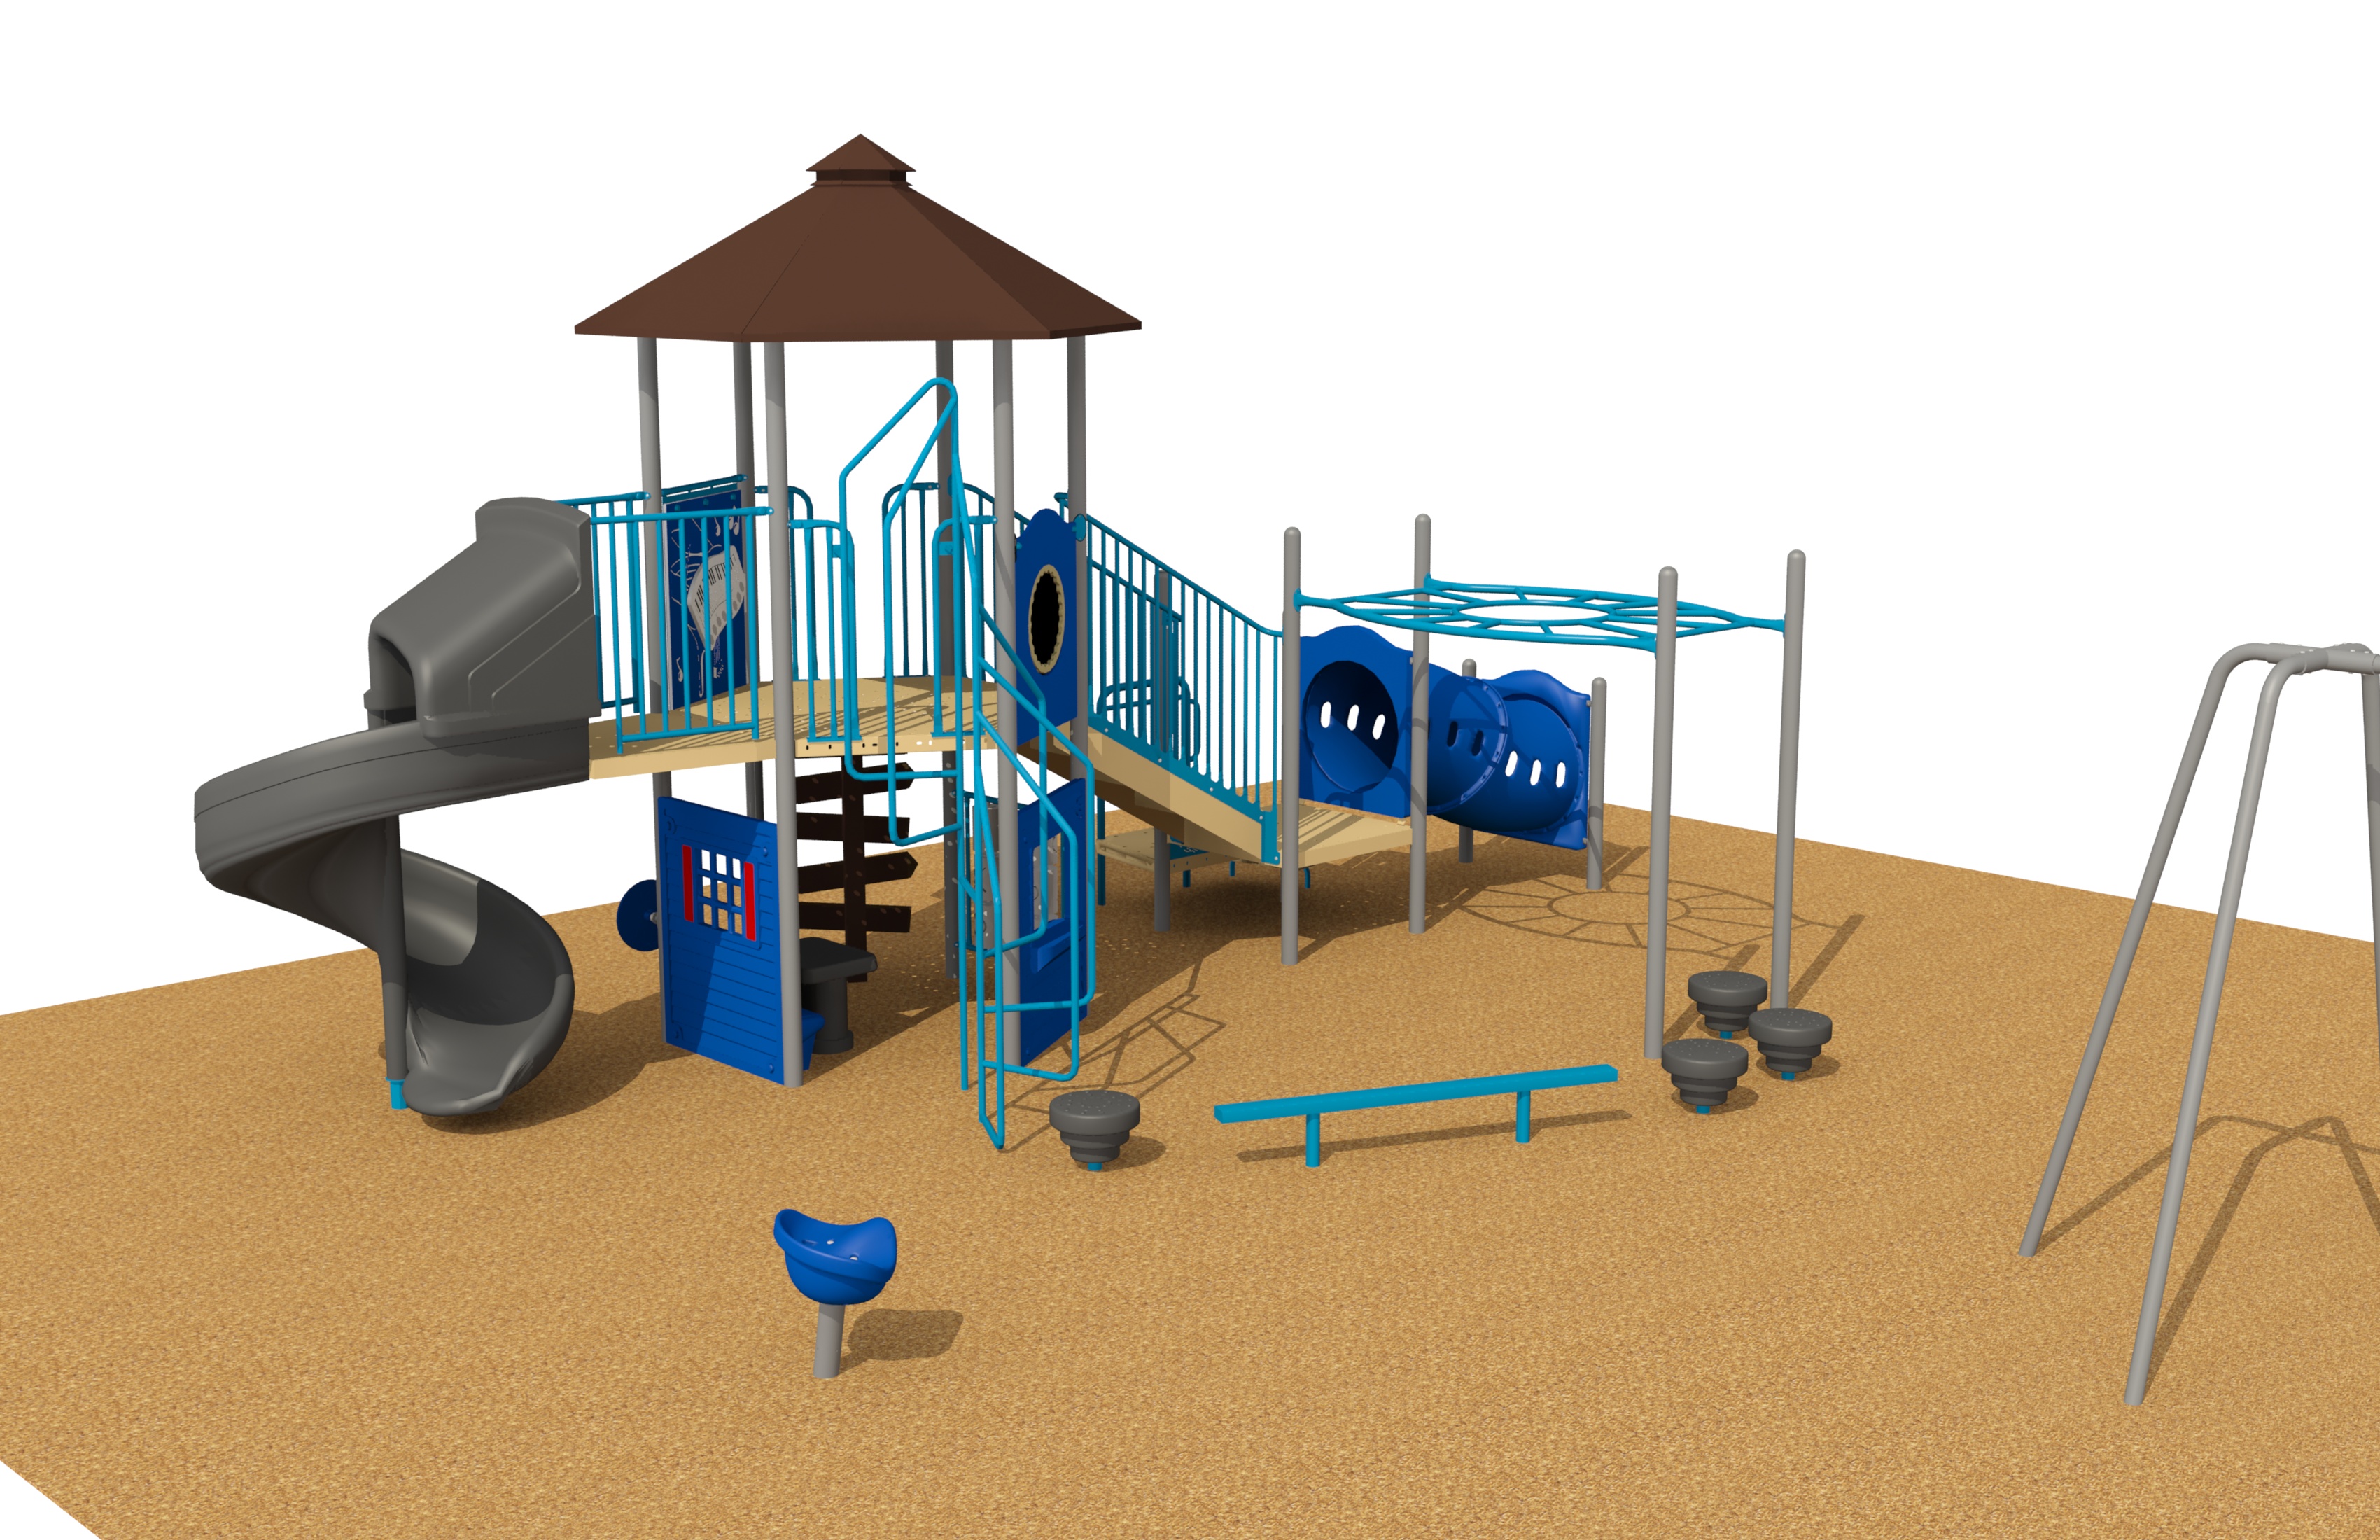 Simon Fraser Play Structure Rendering